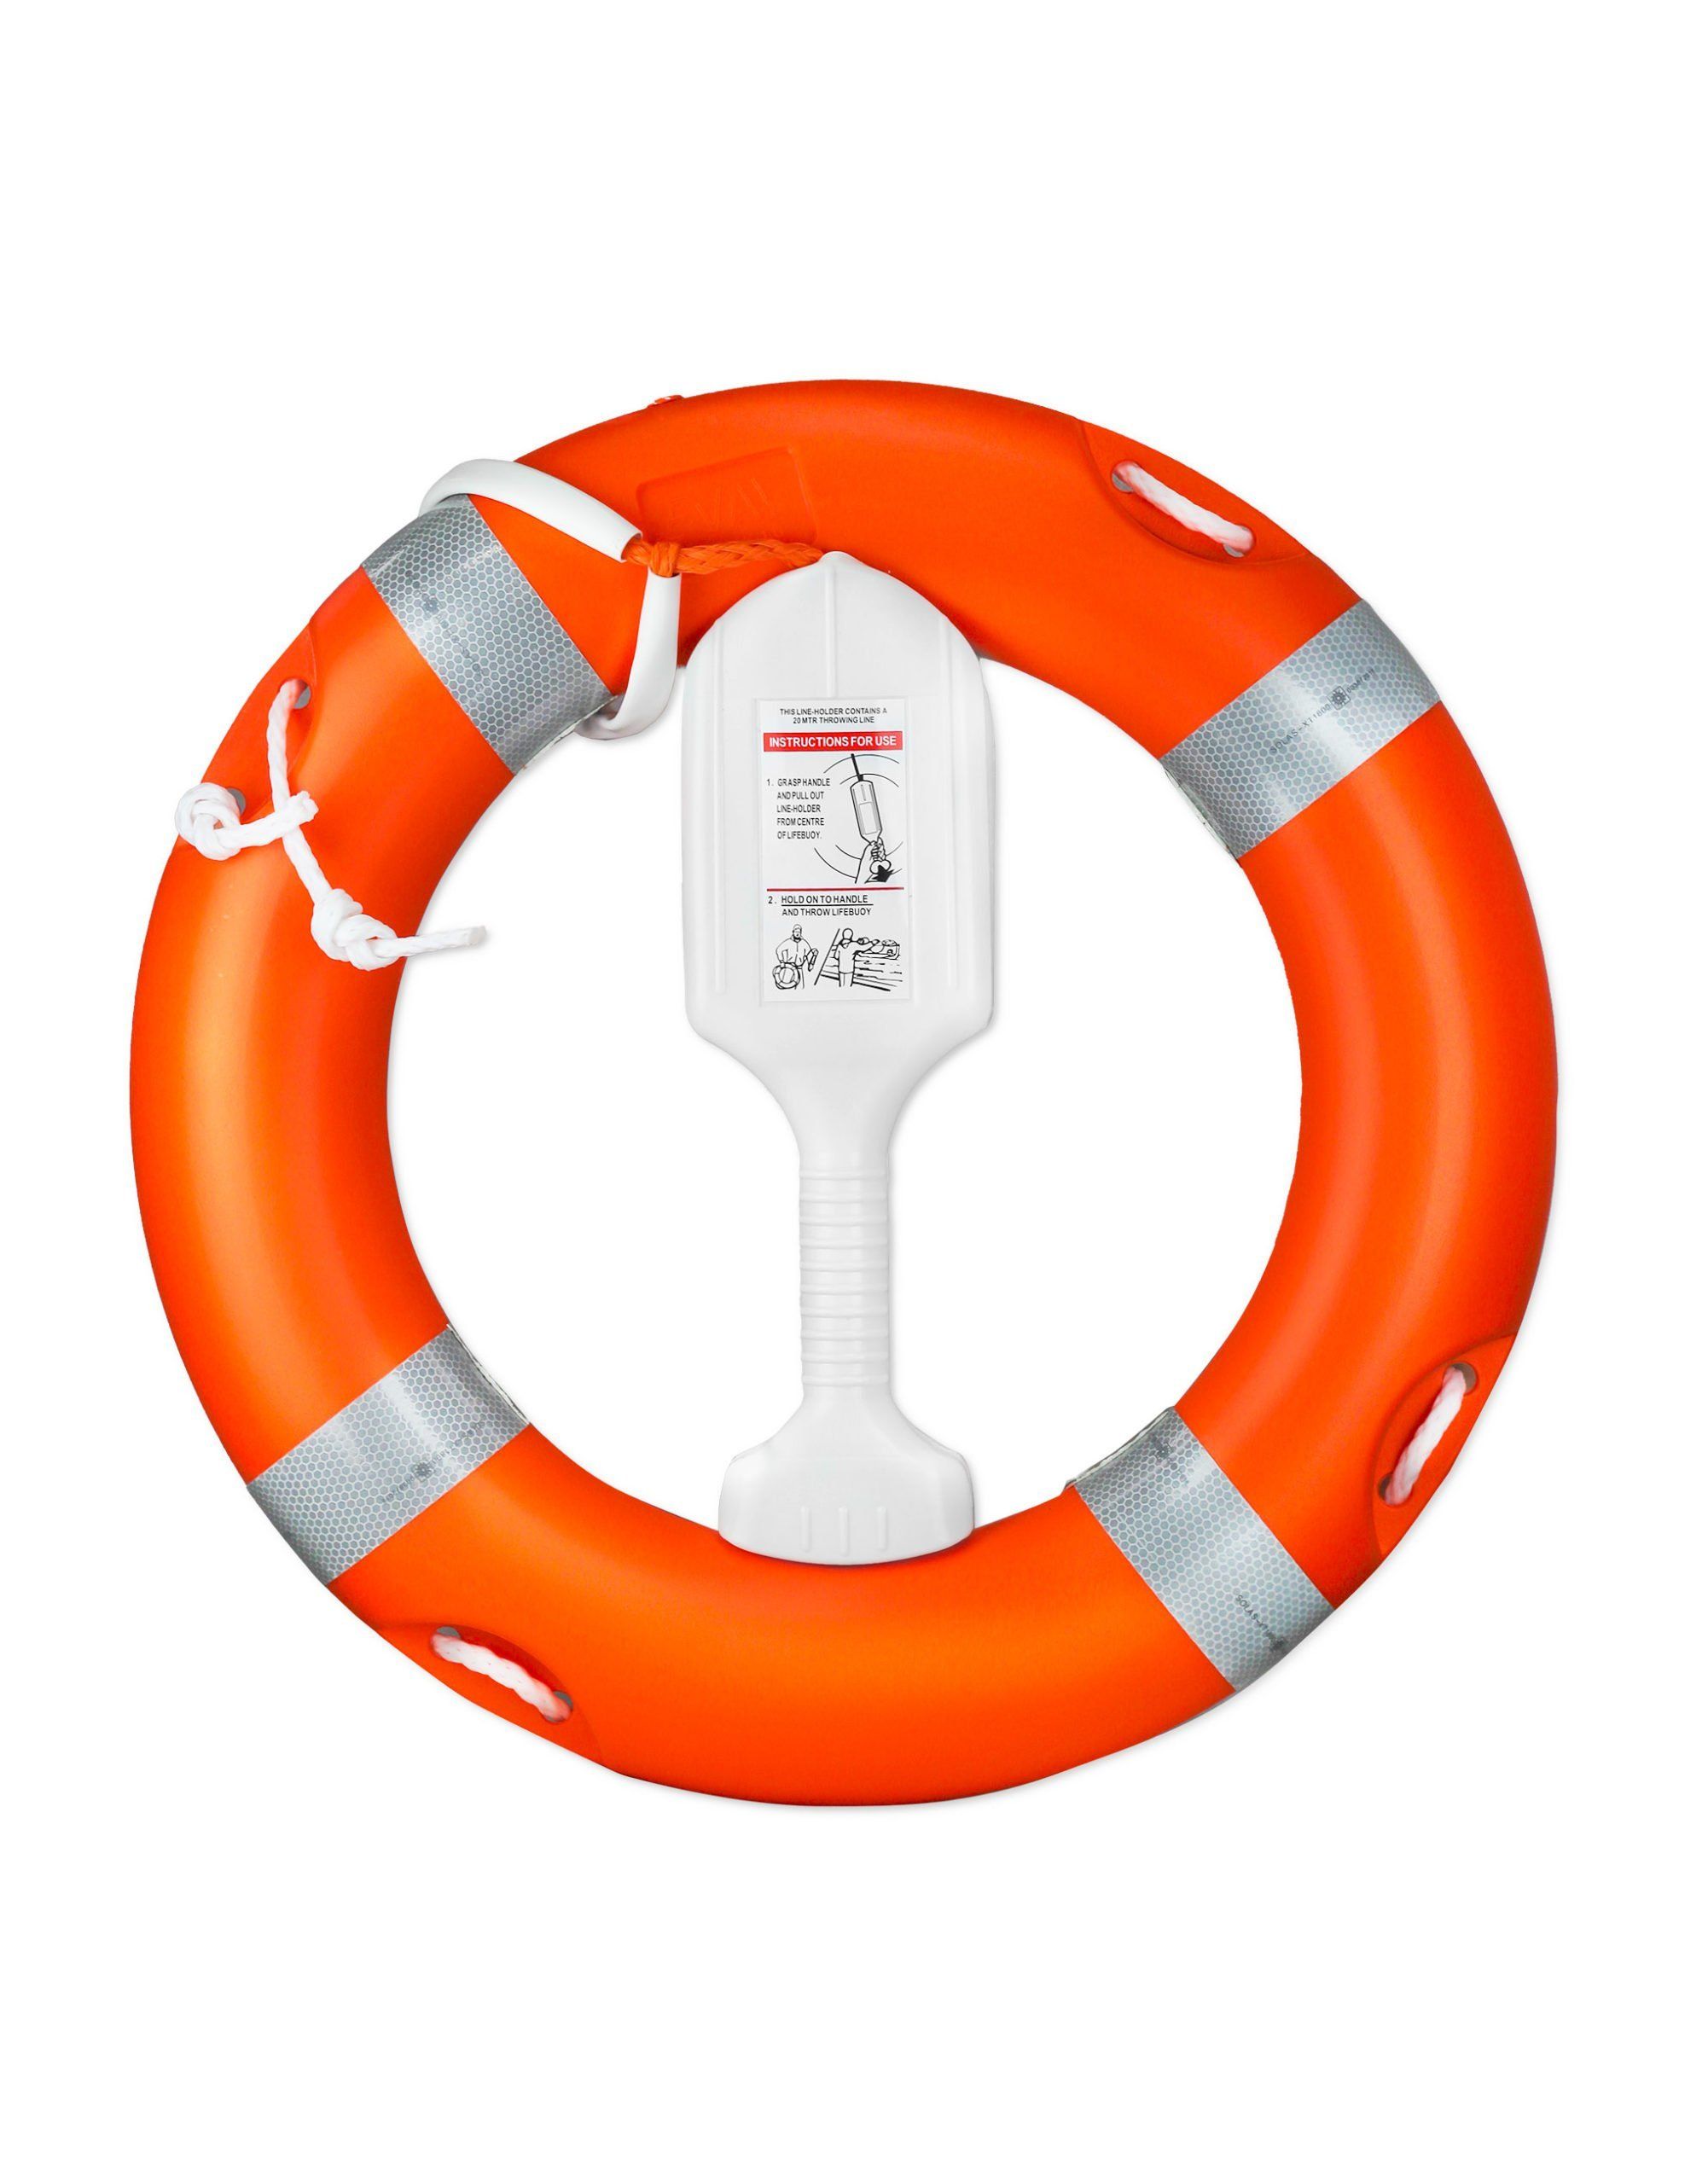 life ring buoy with encapsulated throw line image